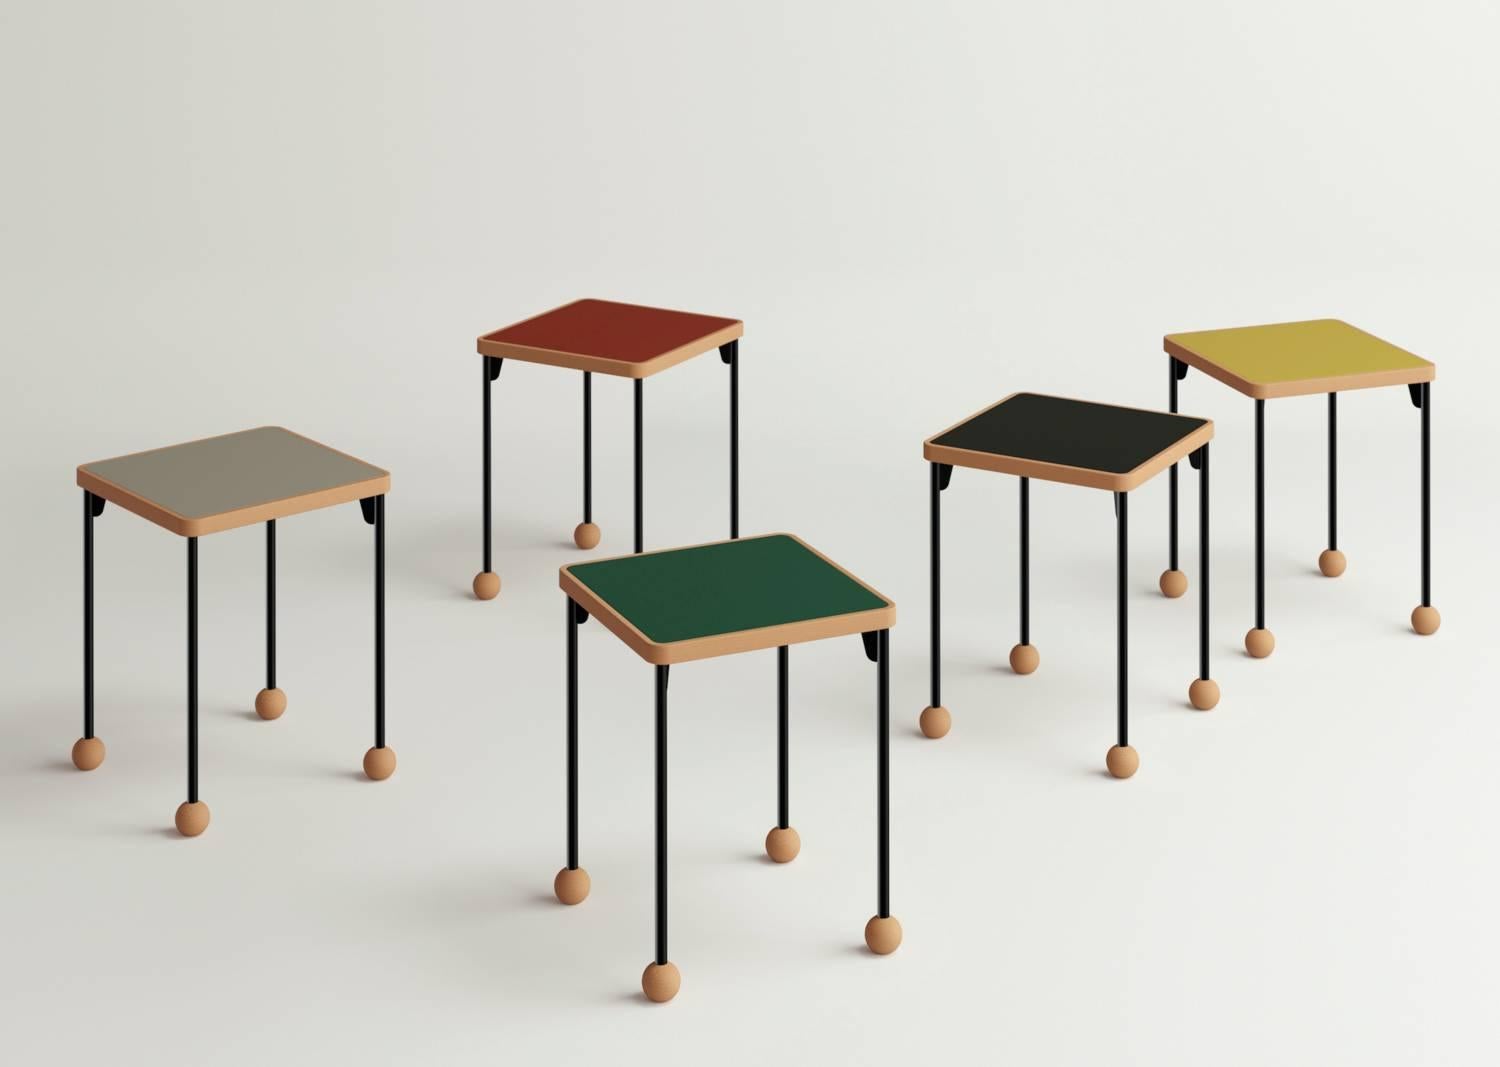 Stools or side tables by Russian designer Dmitry Samygin

Beech wood, metal and linoleum Forbo
Measures: 45.7 cm x 35.6 cm x 35.6 cm

Available colors: black, grey, red, yellow and green

[Sold individually]

After studying Applied Arts at